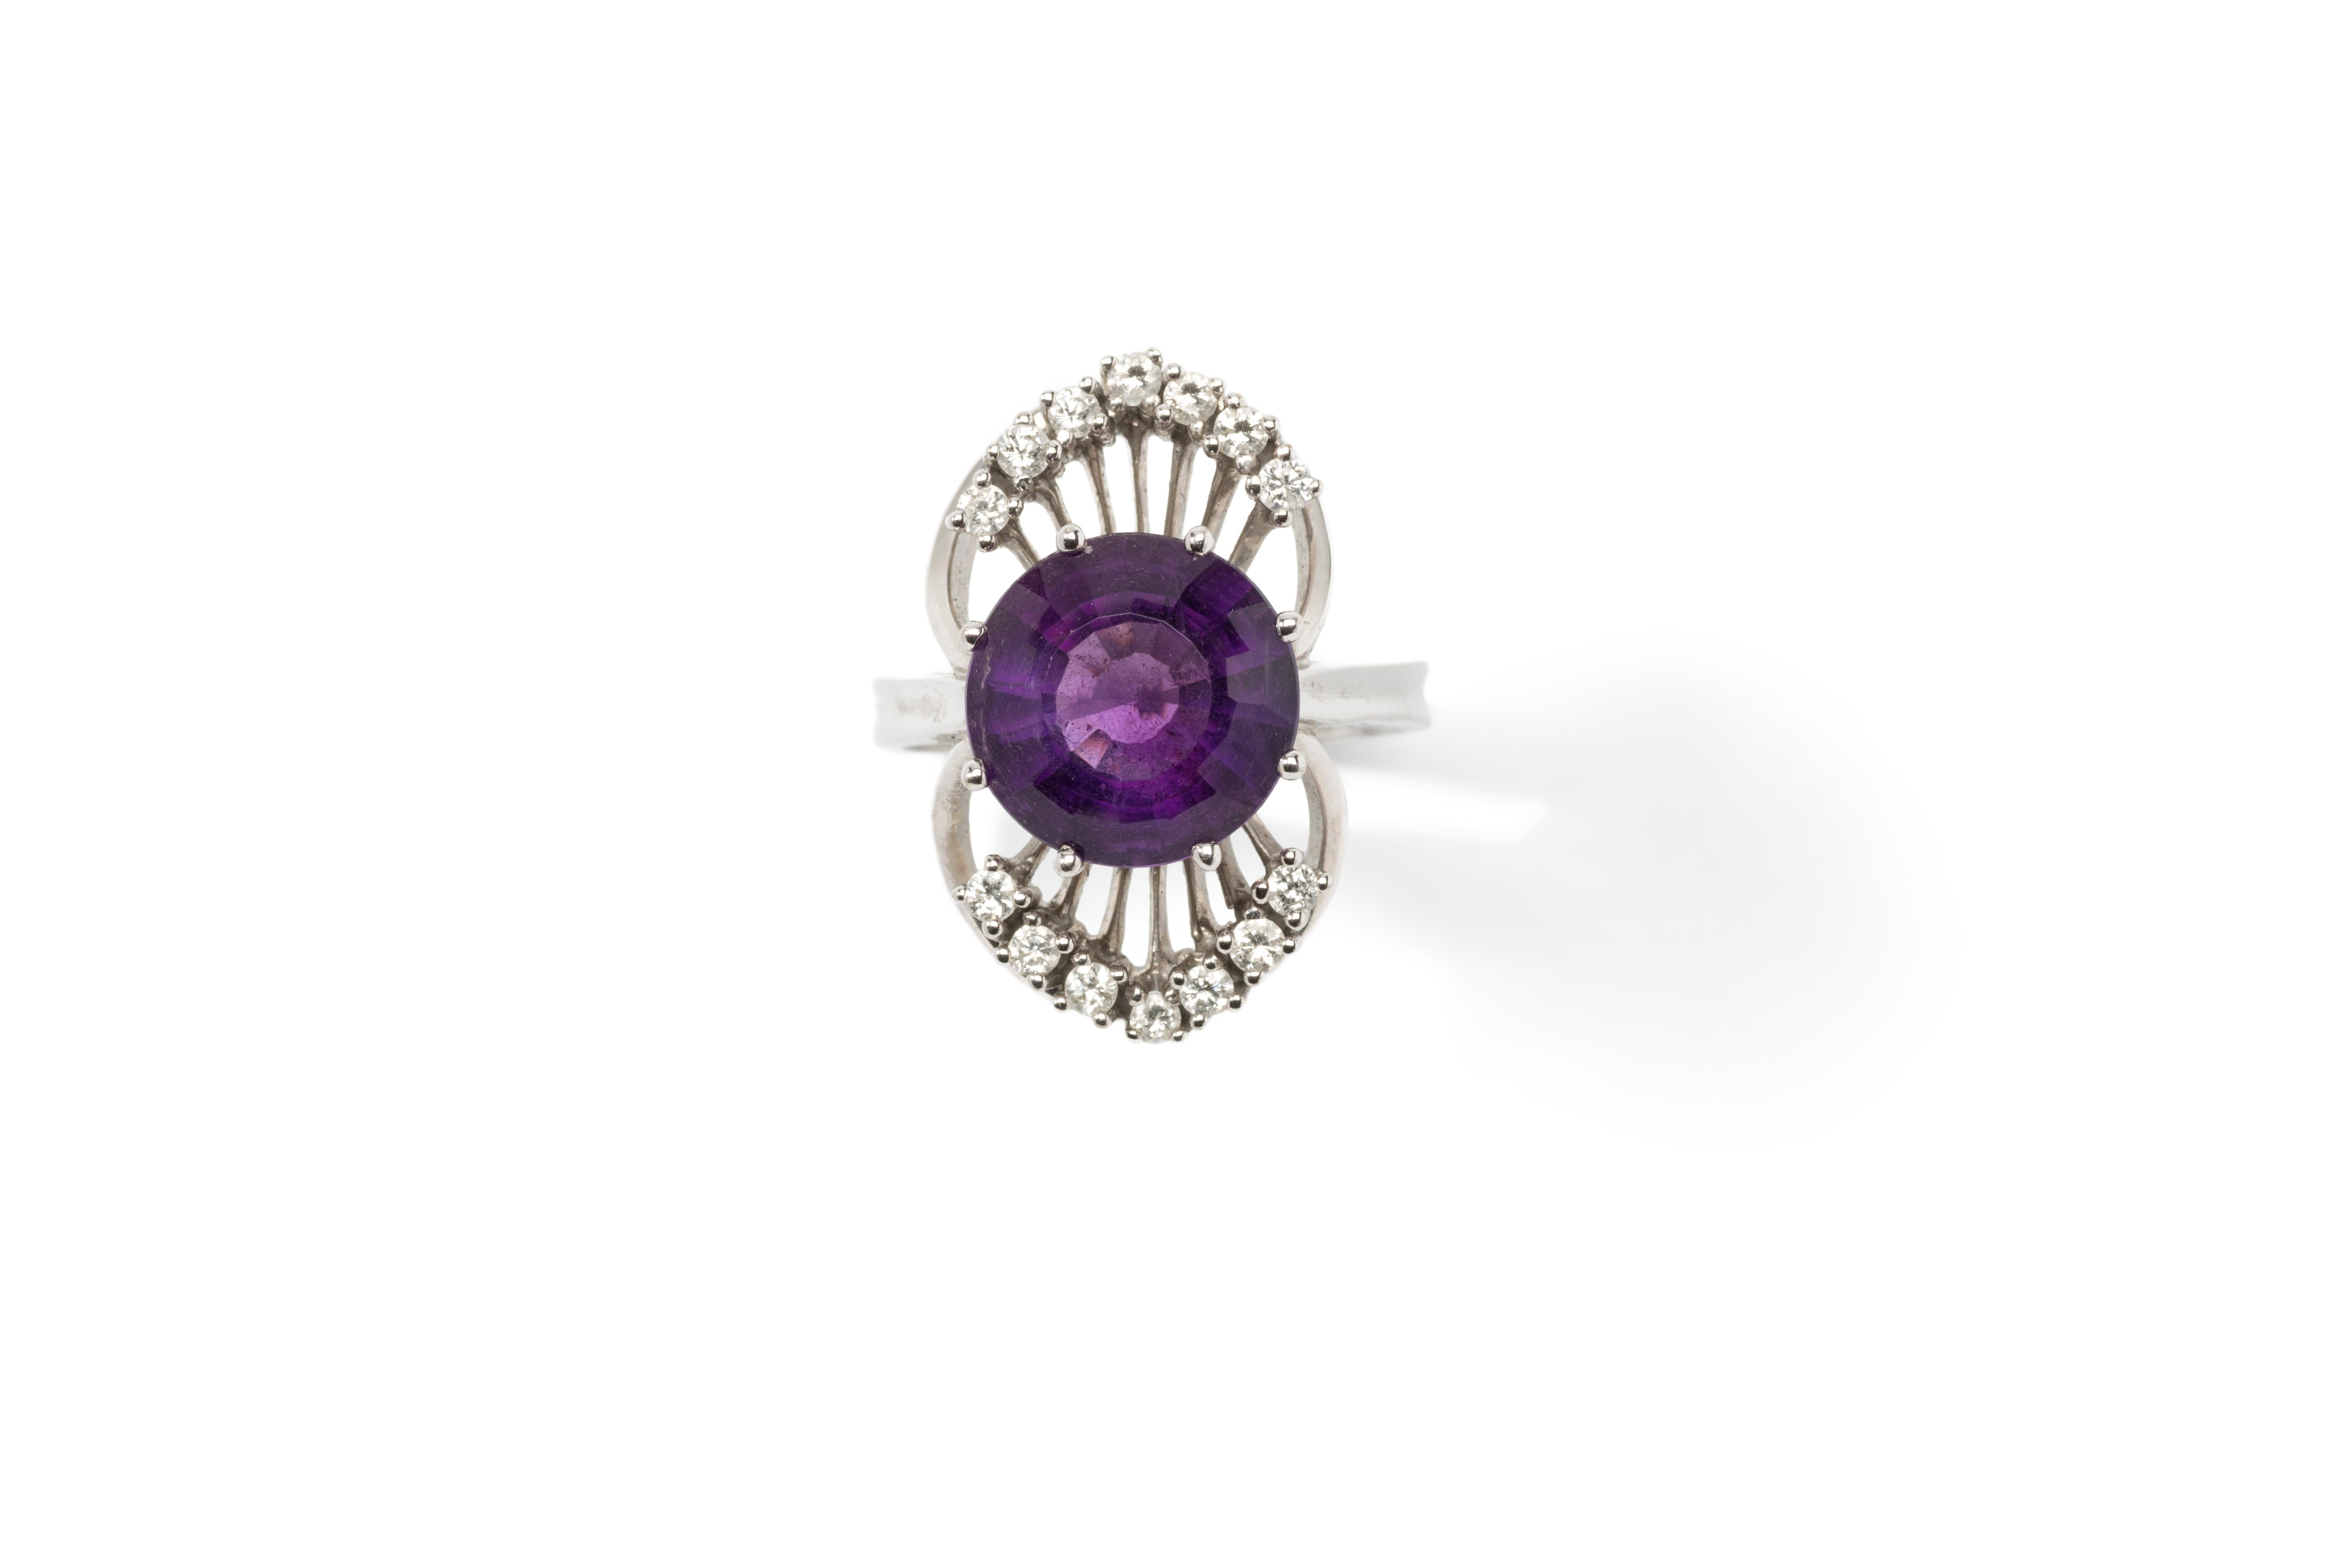 Europe, 1950's. Set with round shaped purple amethyst and 14 brilliant-cut diamonds weighing total circa 0,42 carats. Mounted in 14 K white gold. Hallmarked with 0,42 585 HR. Weight: 13.46 grams. Ring size: 59 ( US 8.5 ). Resizable

